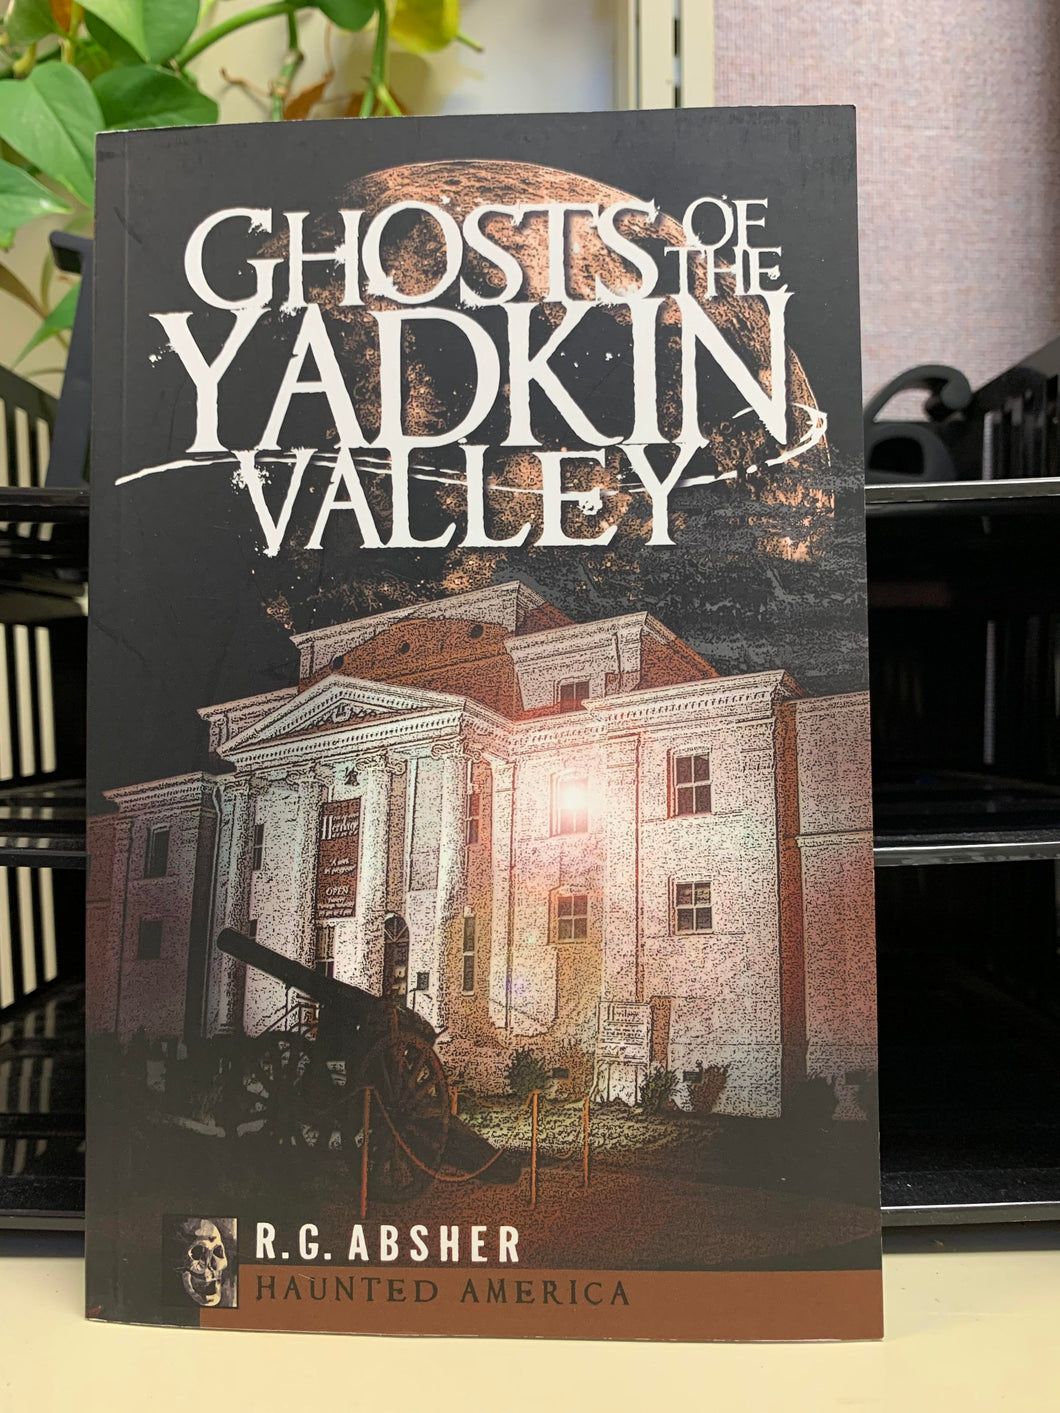 Ghosts of the Yadkin Valley by R.G. Absher